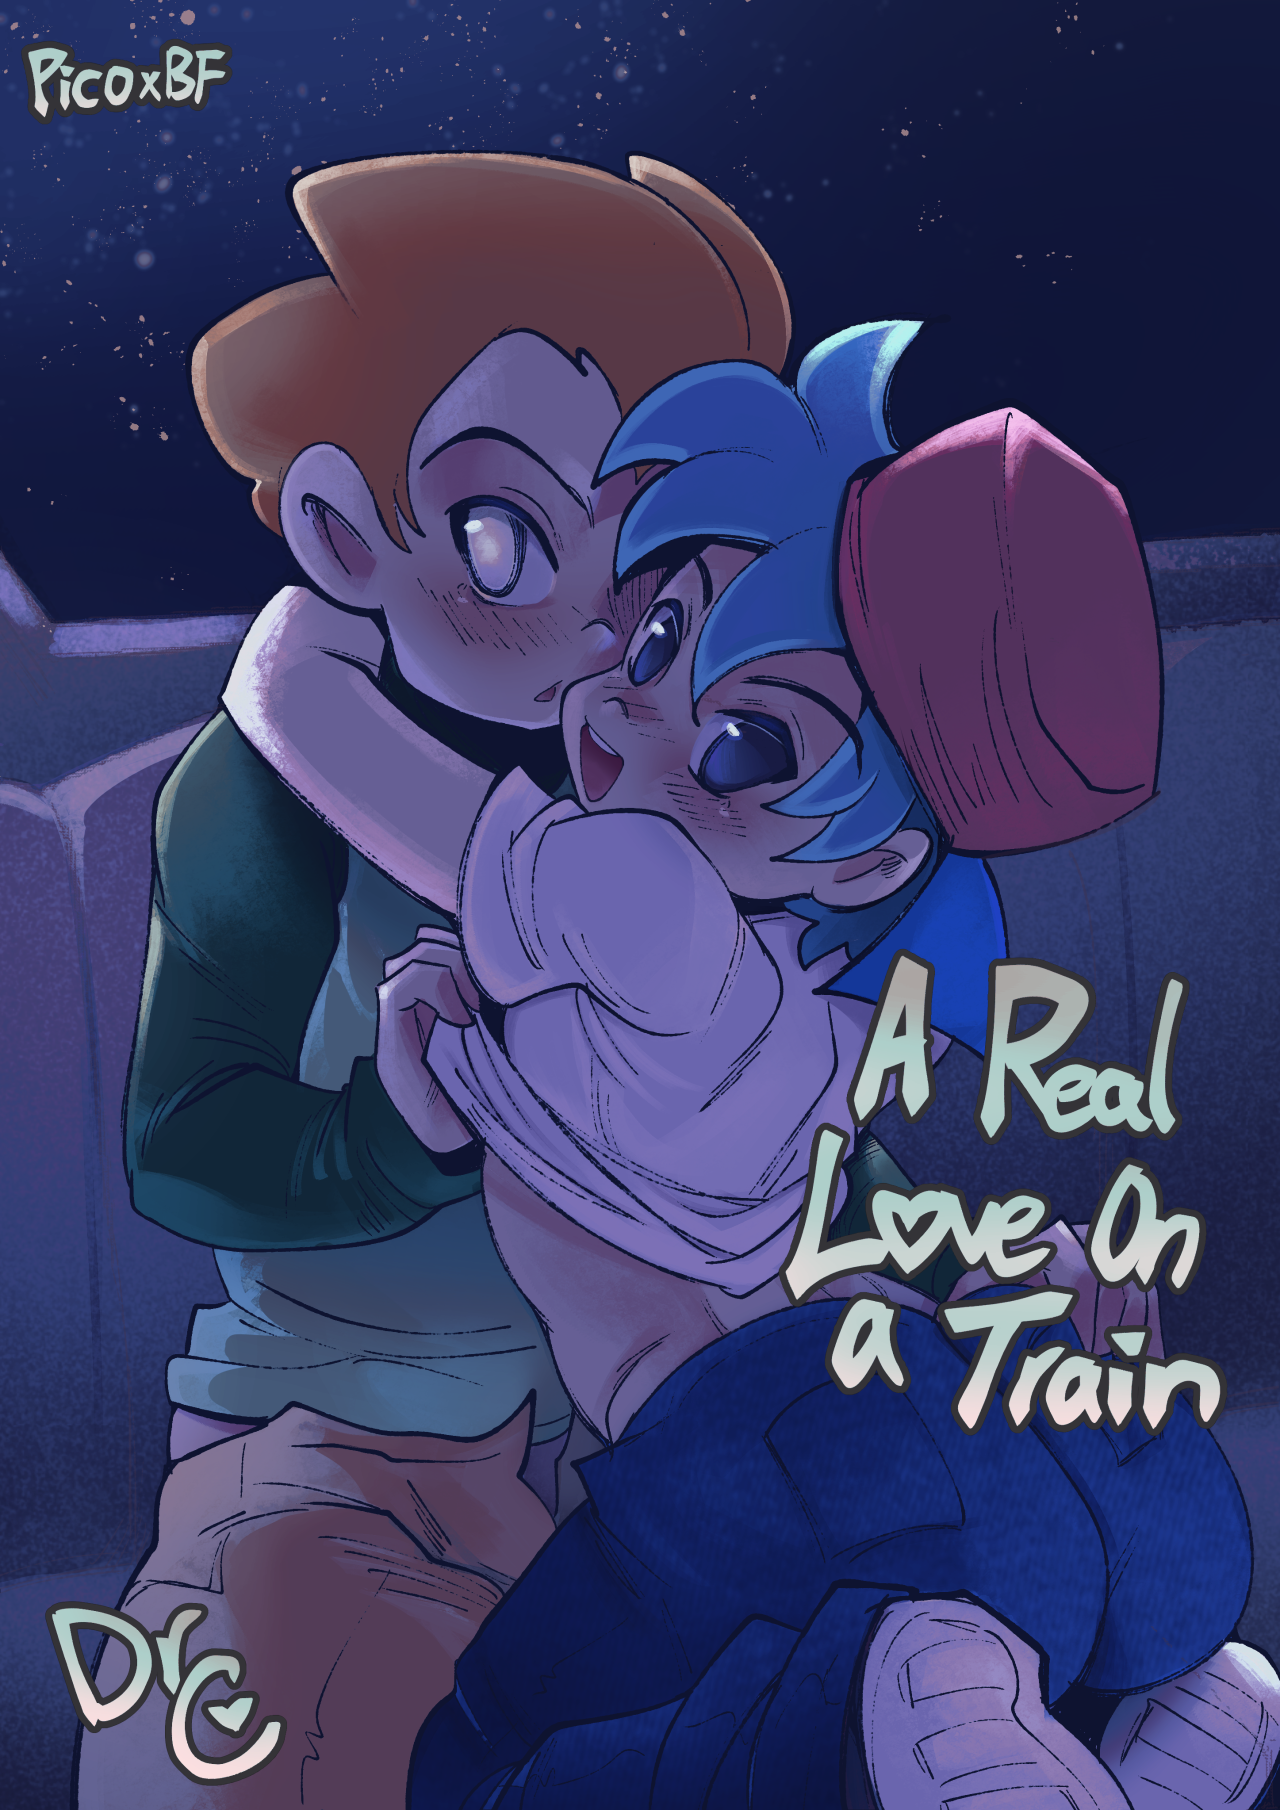 X 3d Bf - A Real Love On a Train gay porn comic